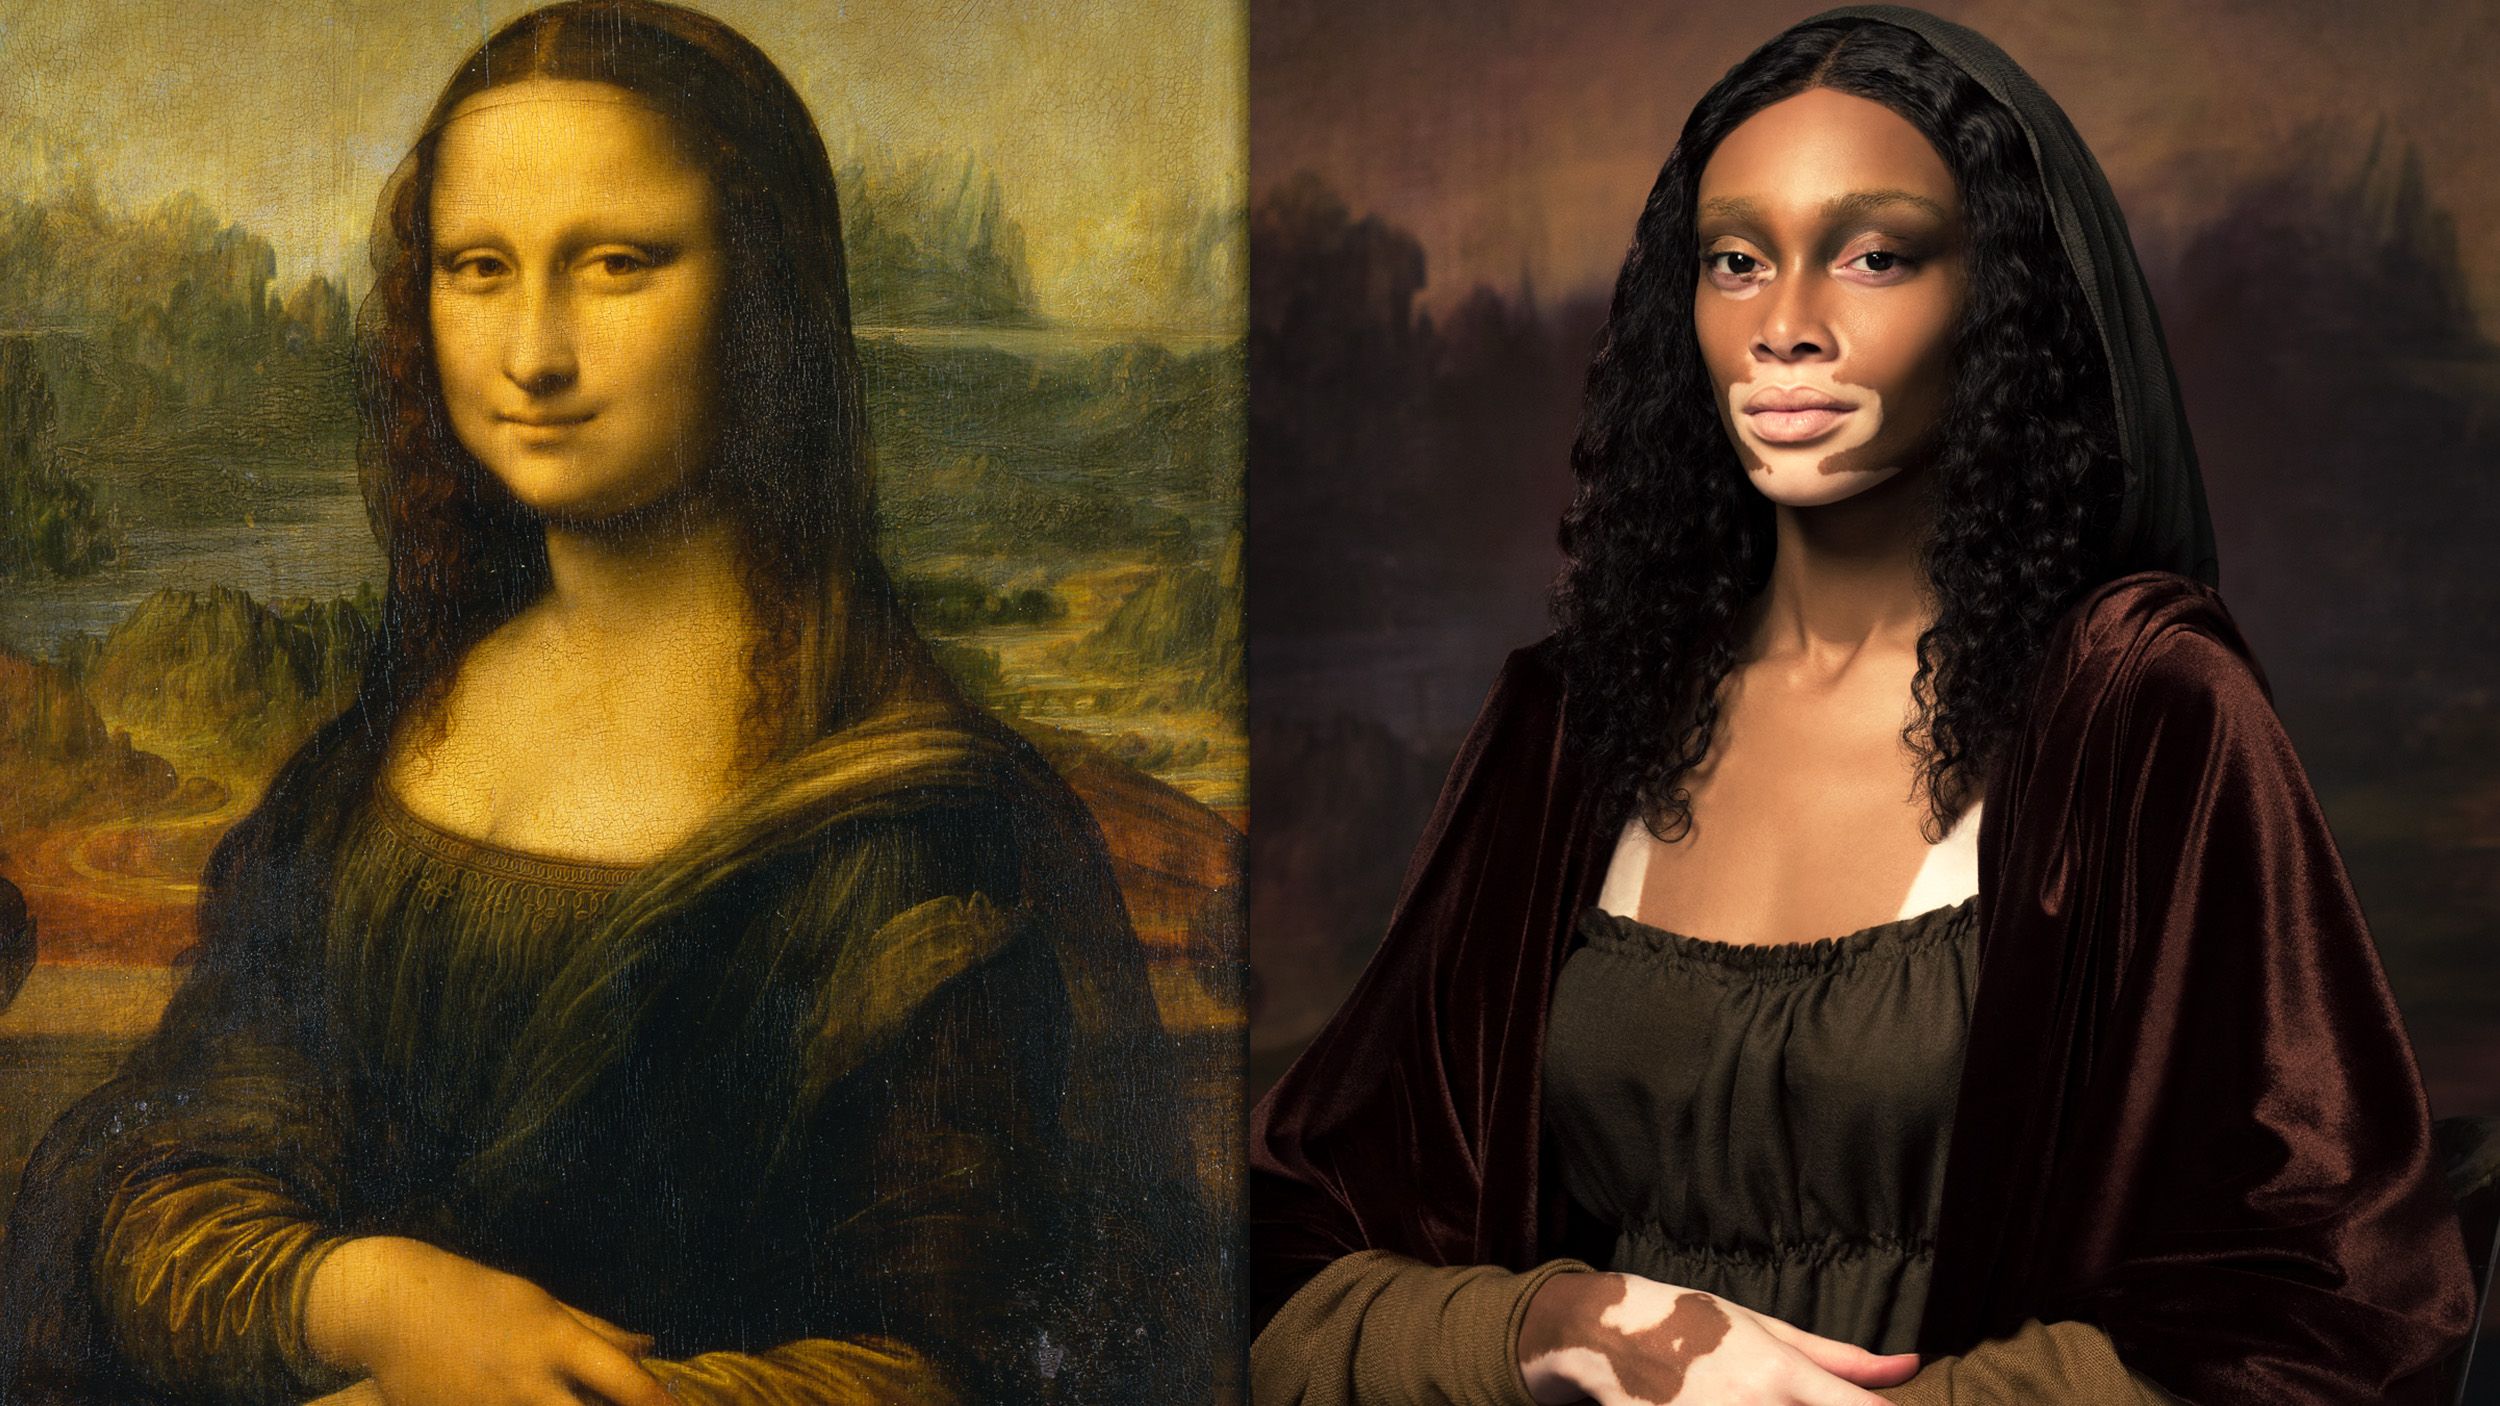 16 Paintings Of Women: Artistic Look At Women Through History